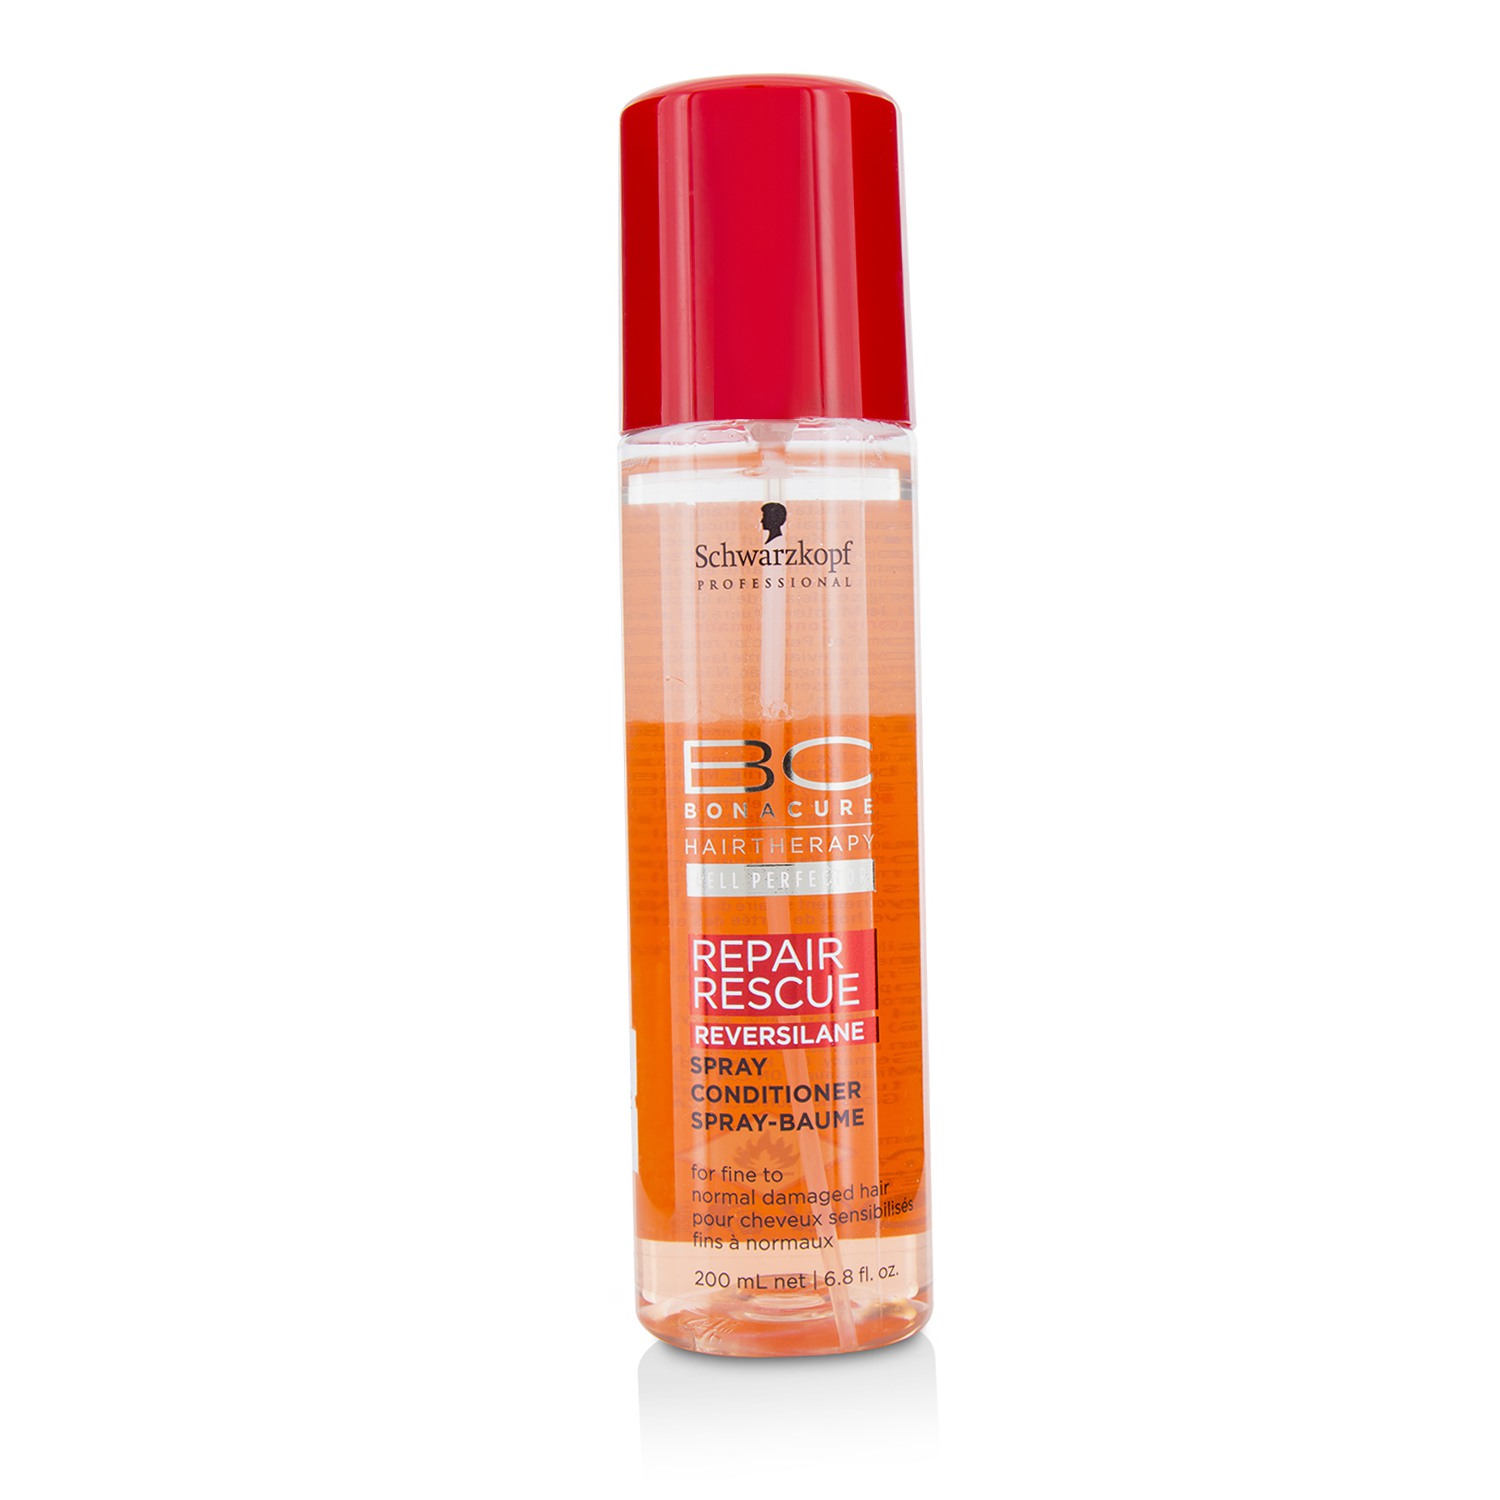 BC Repair Rescue Reversilane Spray Conditioner (For Fine to Normal Damaged Hair) Schwarzkopf Image